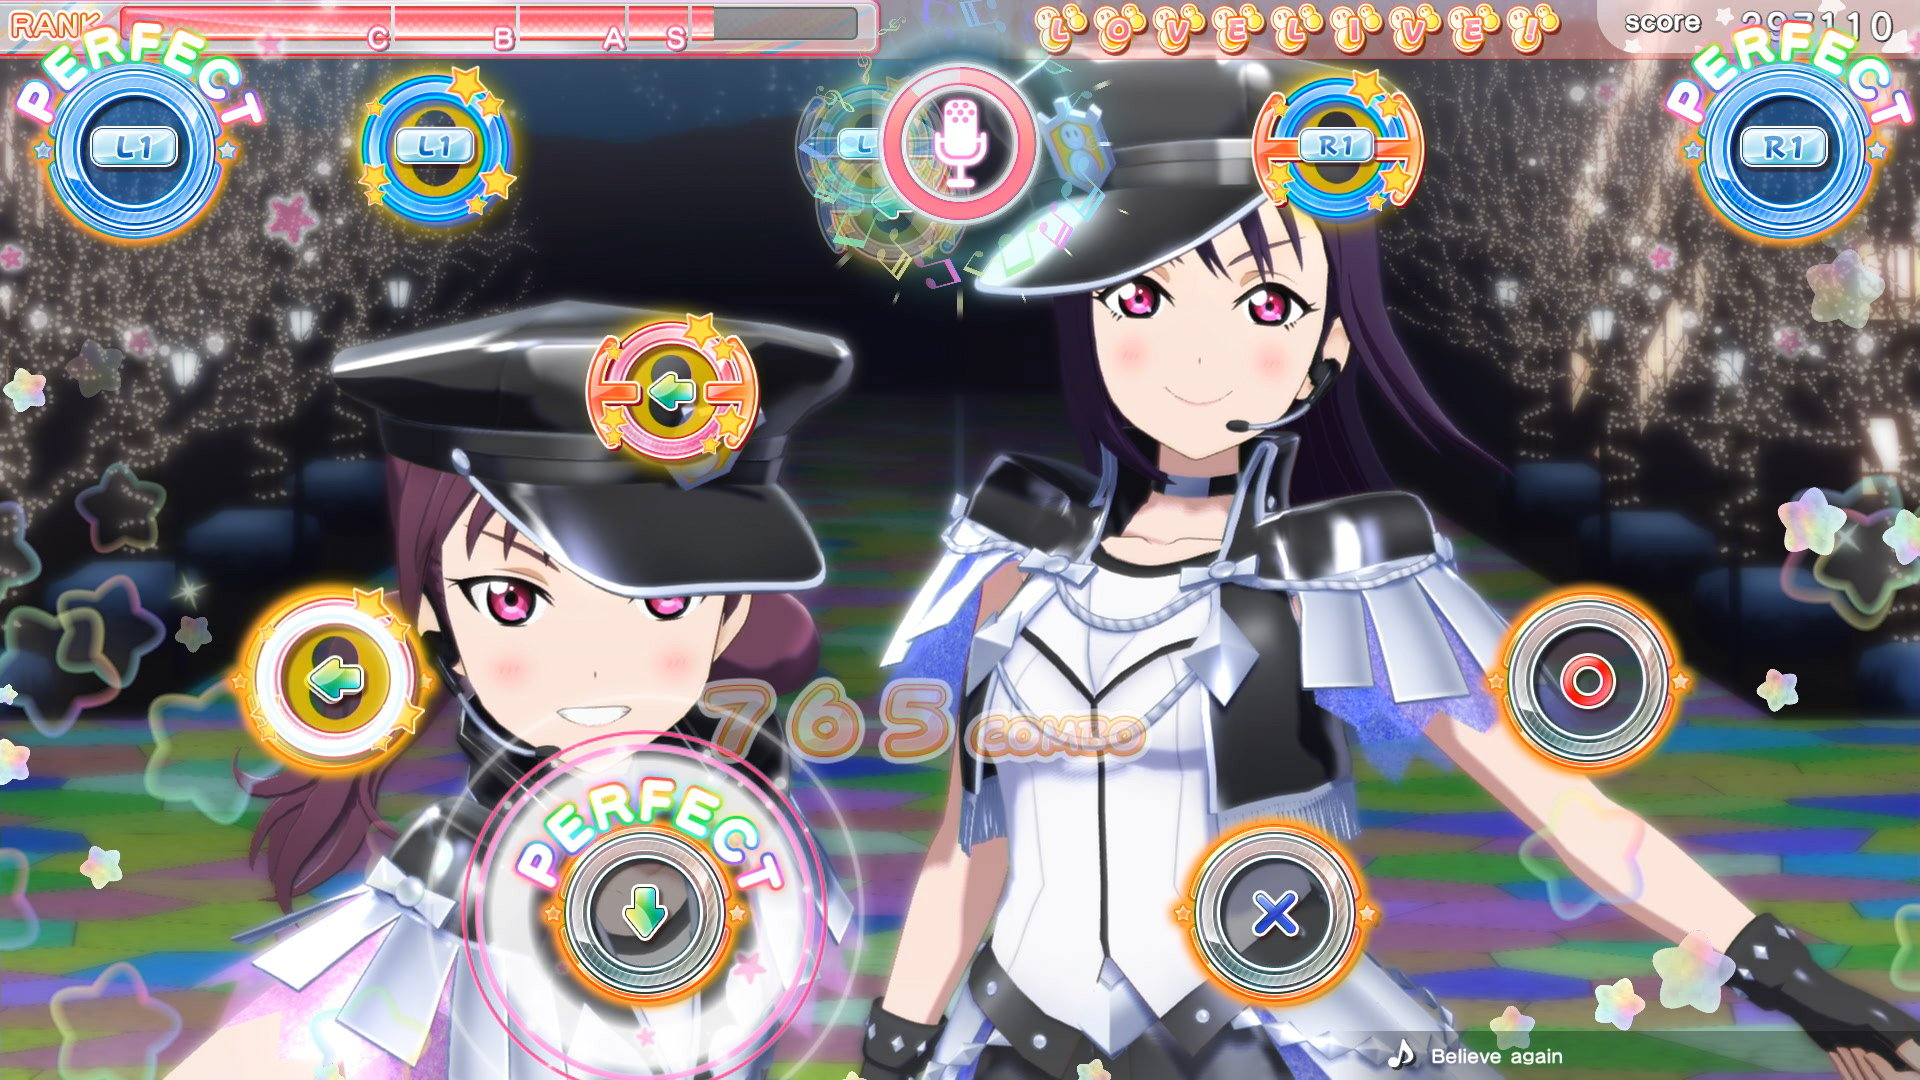 Love Live Ps4 F2p Releases 3 24 Costs 360 37 510 To Buy All The Dlc Songs Individually Resetera